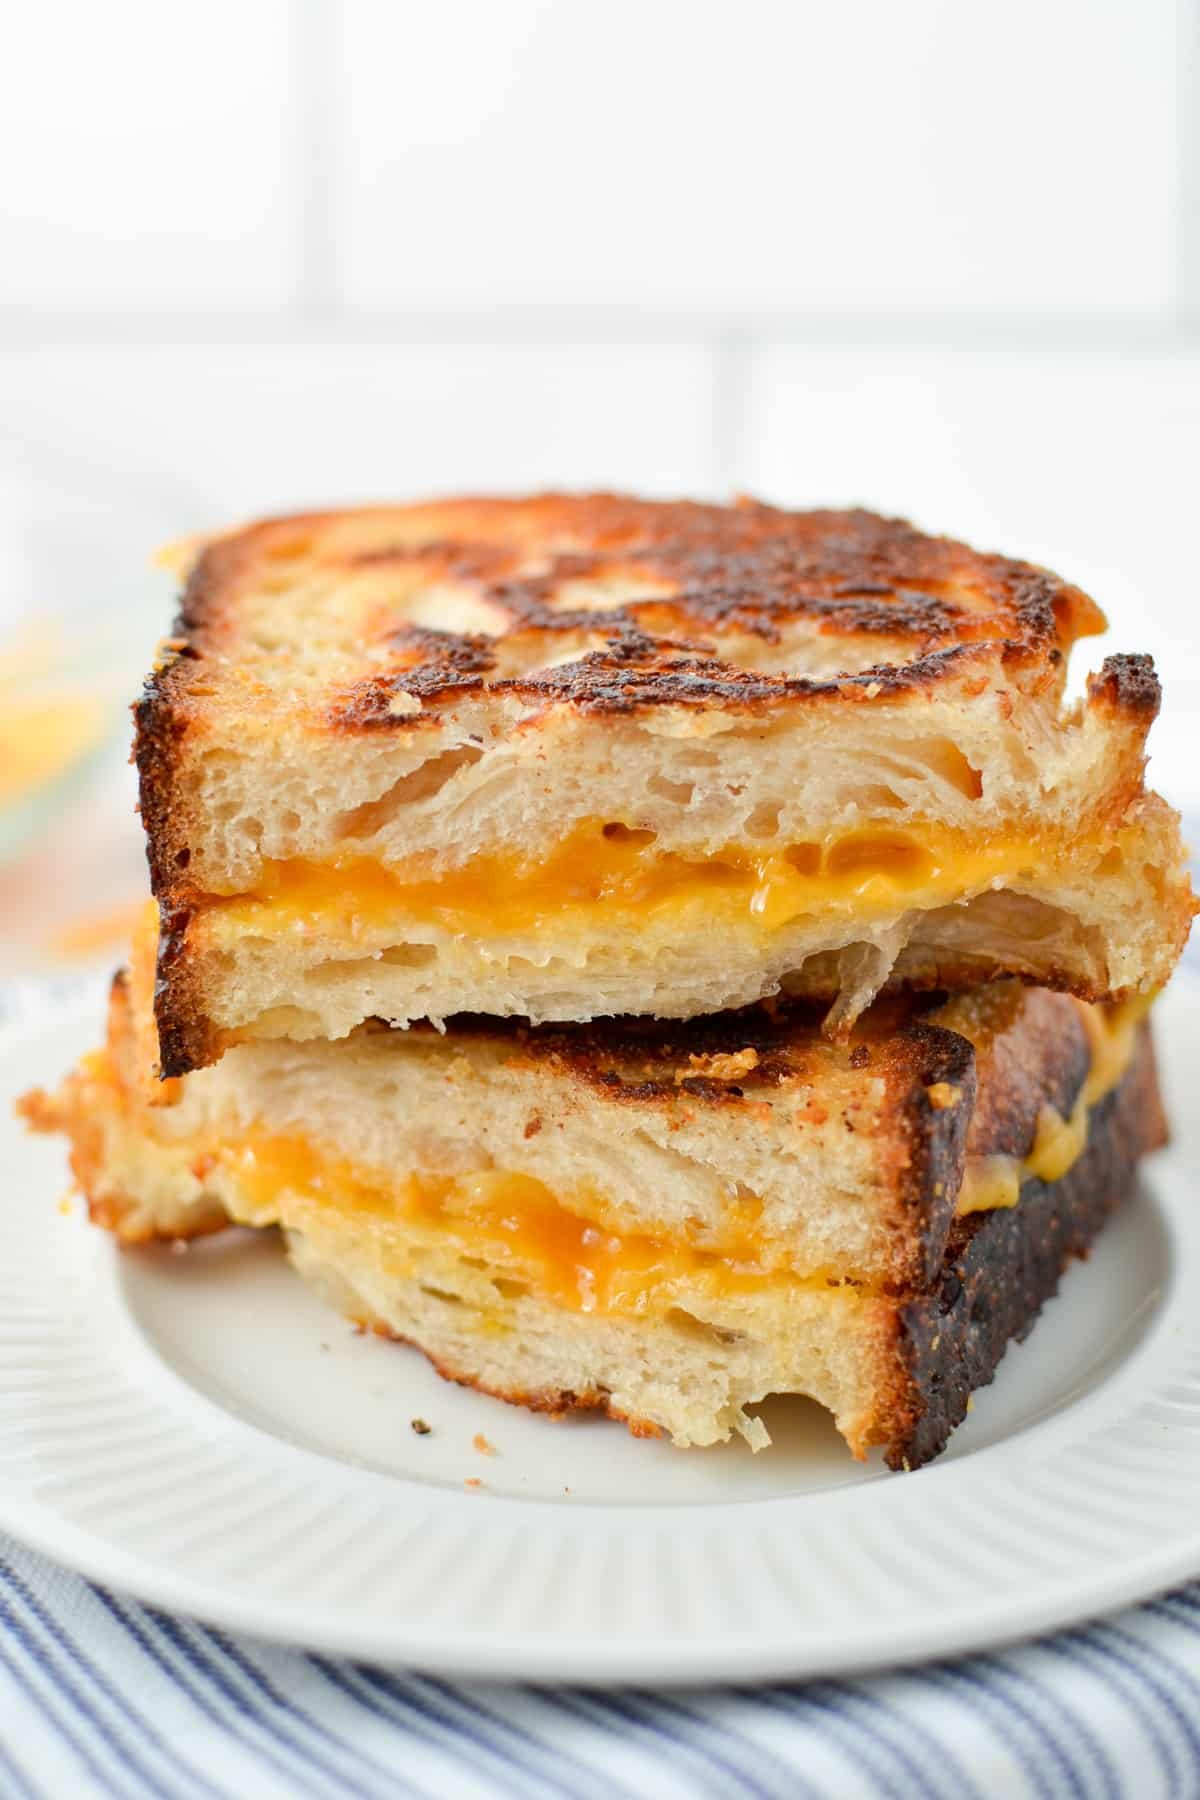 Two halves of a sourdough grilled cheese sandwich, stacked on top of each other.